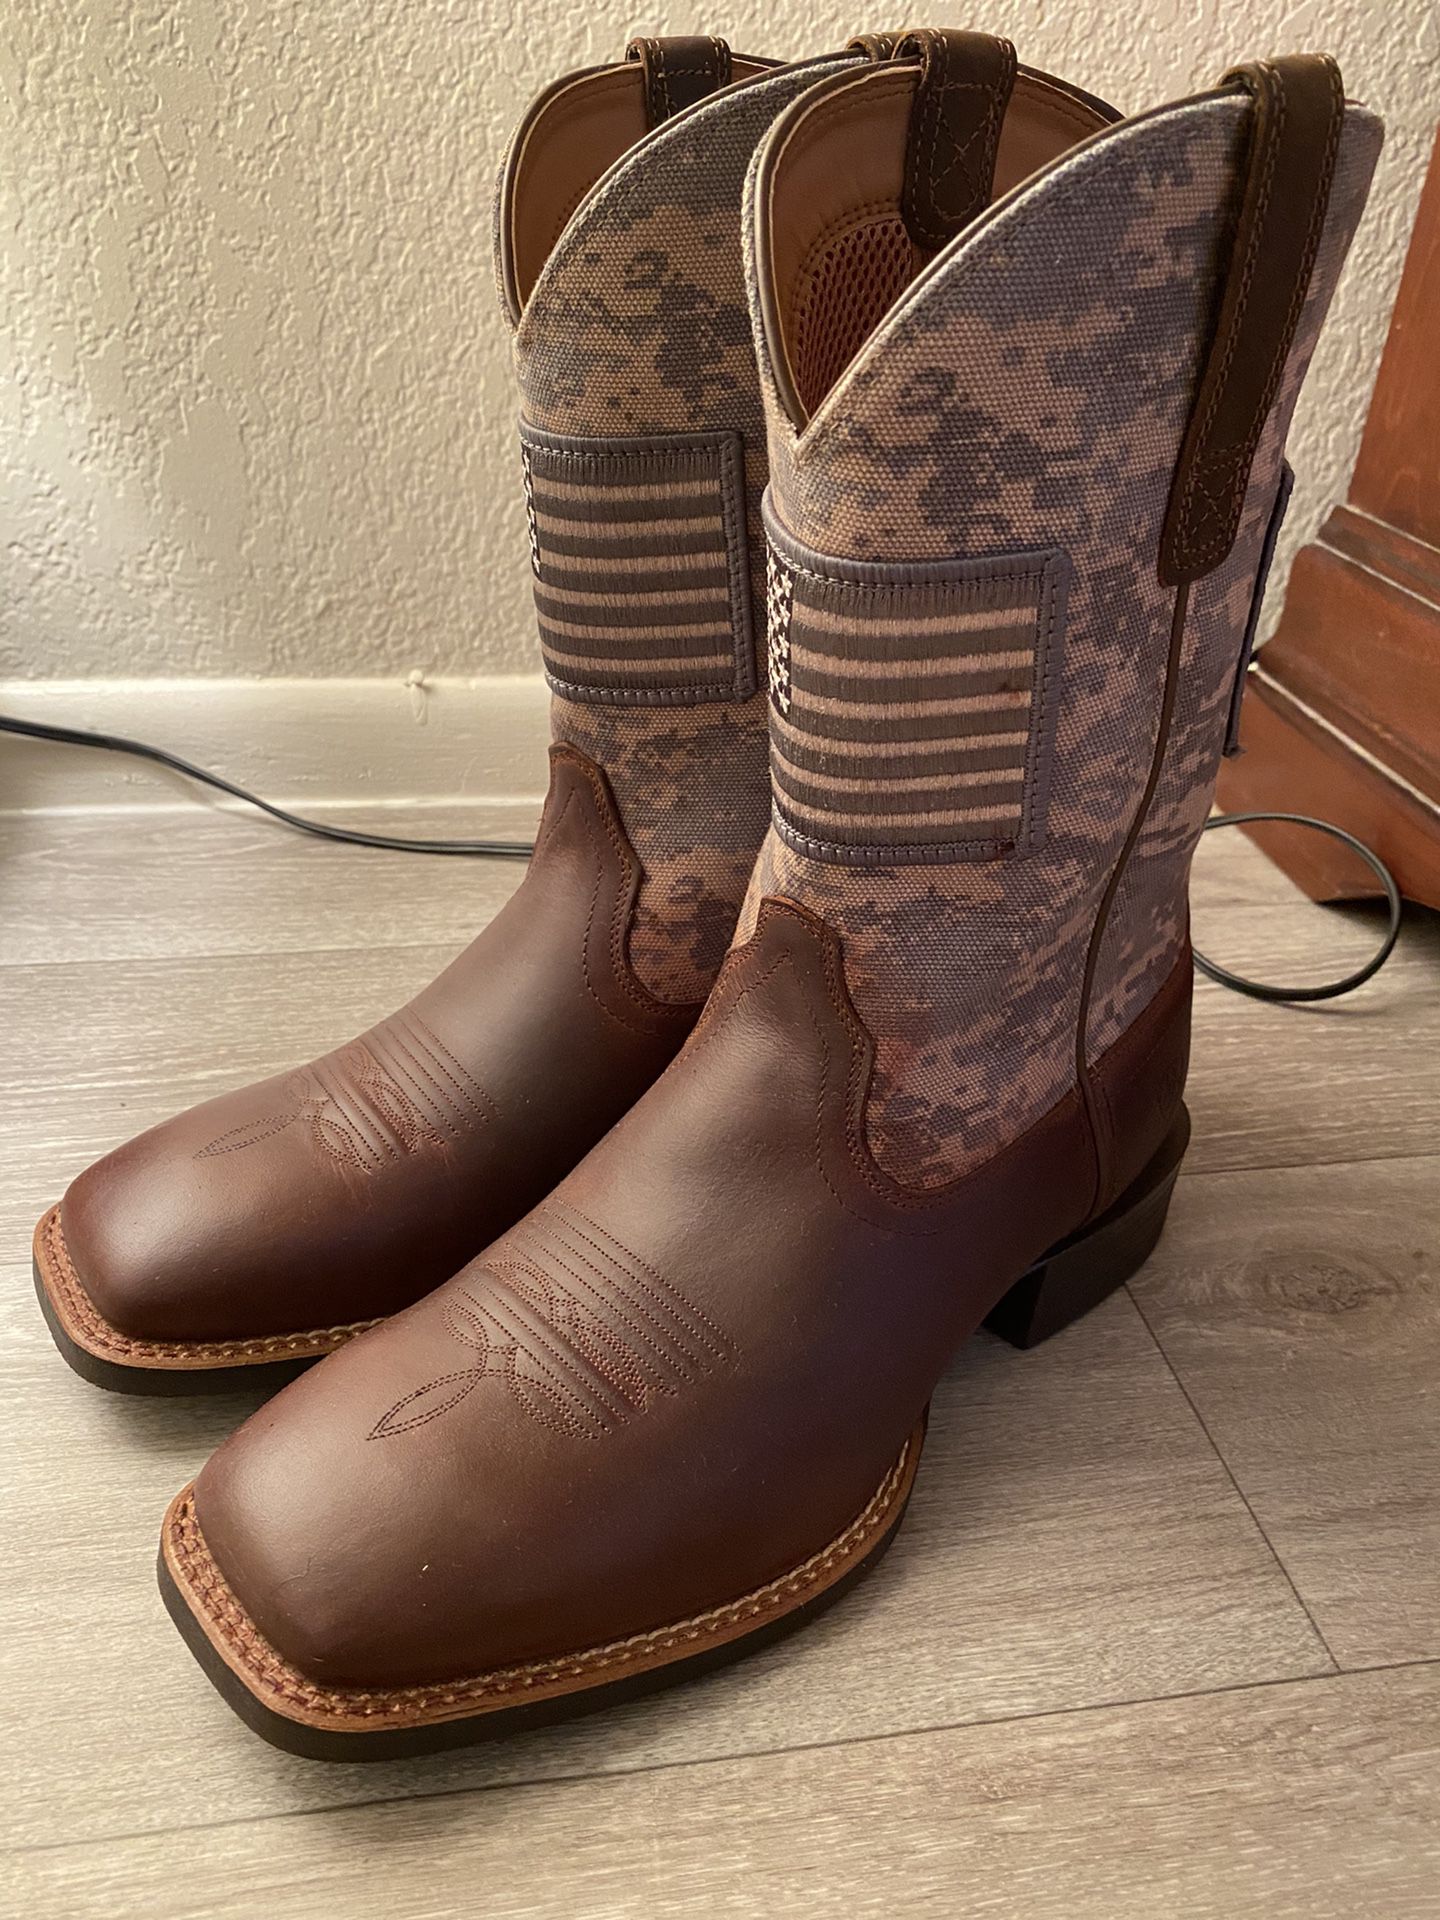 Practically new Ariat Boots